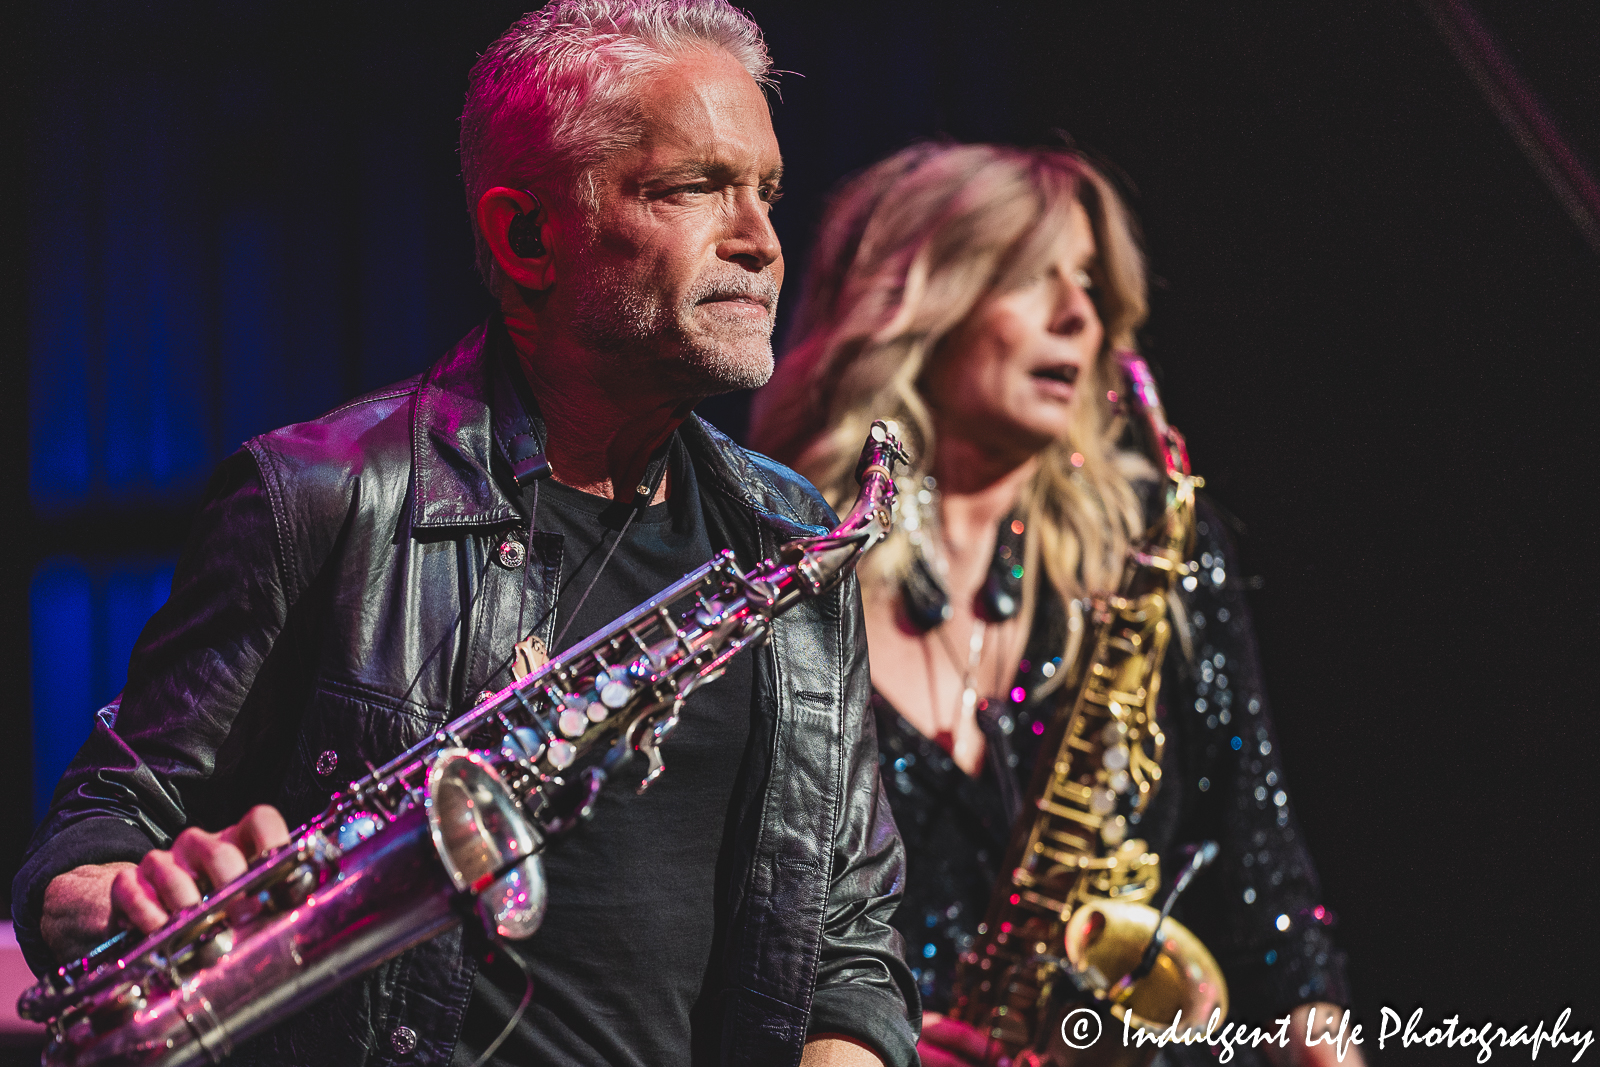 Saxophonists Dave Koz and Candy Dulfer performing live in concert together at Muriel Kauffman Theatre in downtown Kansas City, MO on July 15, 2023.